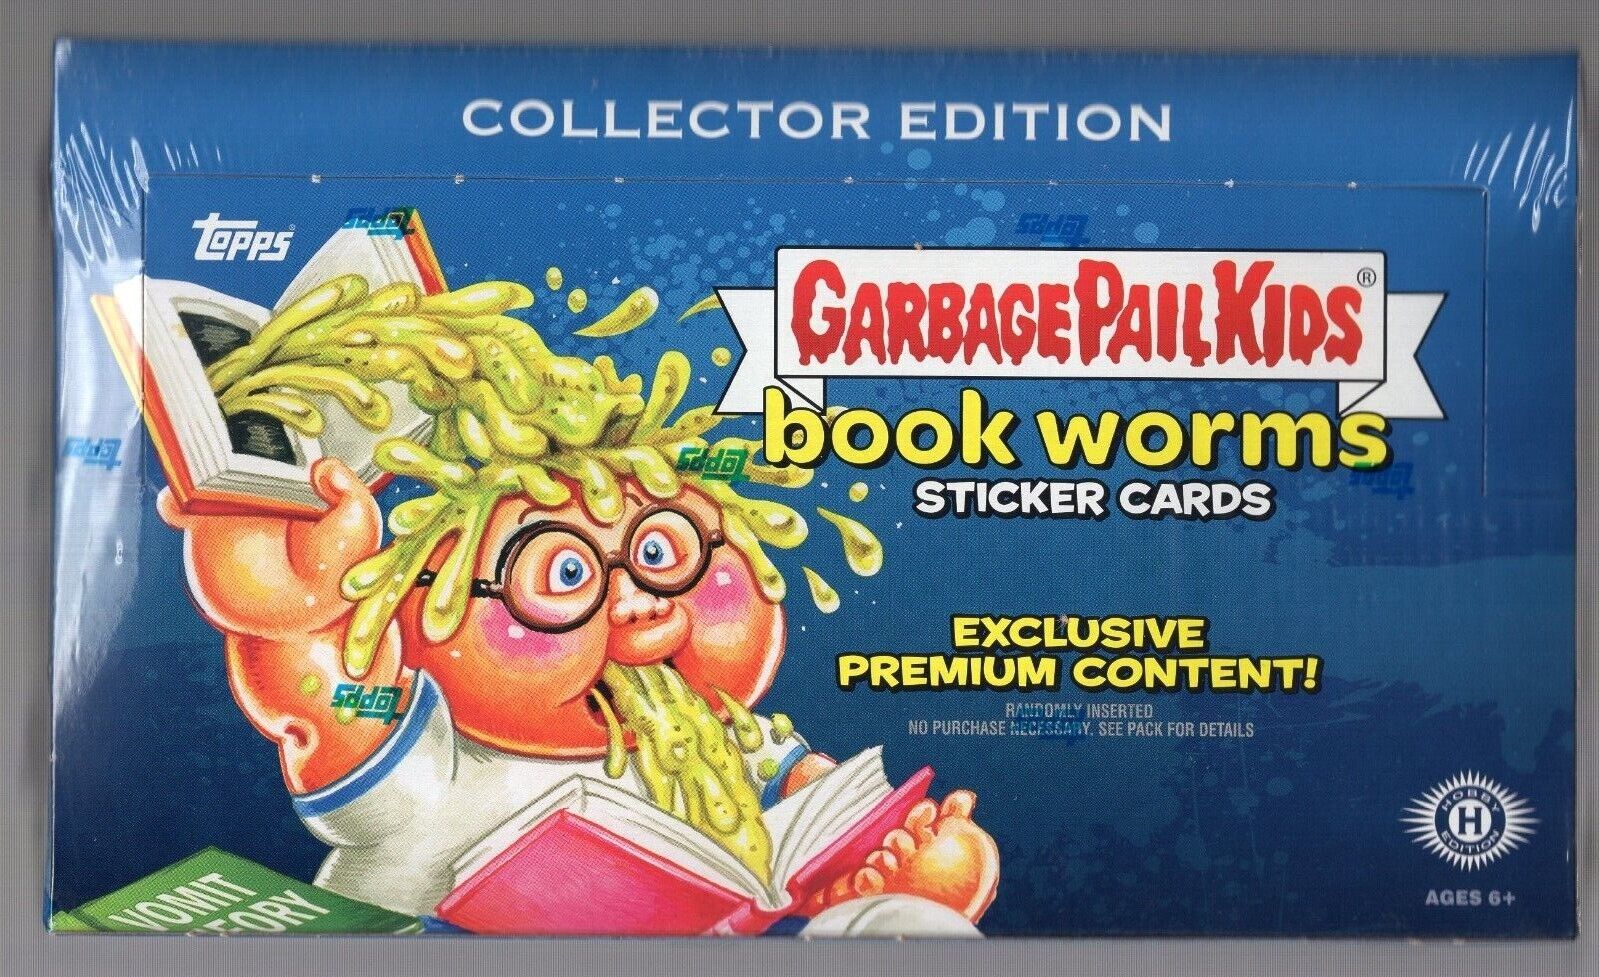 2022 TOPPS GARBAGE PAIL KIDS COLLECTOR EDITION BOOK WORMS FACT SEALED HOBBY BOX